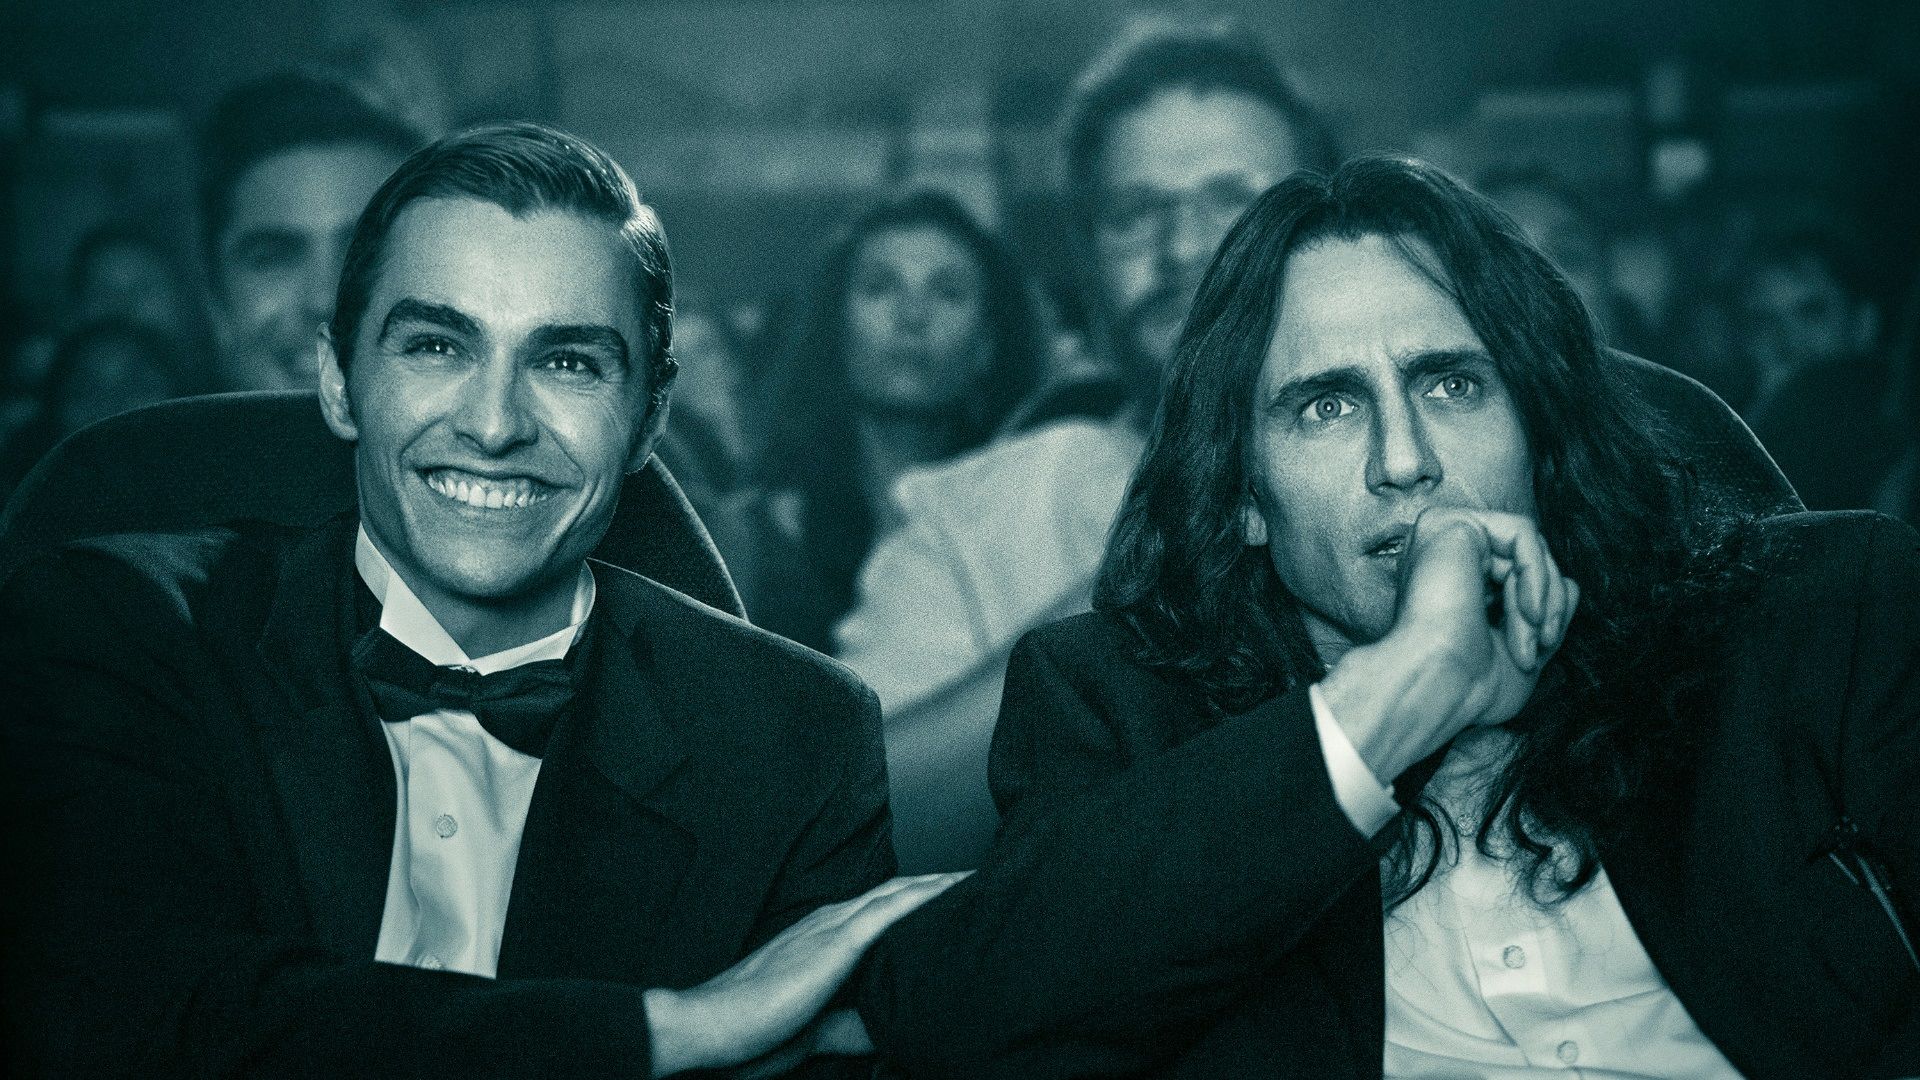 The Disaster Artist background